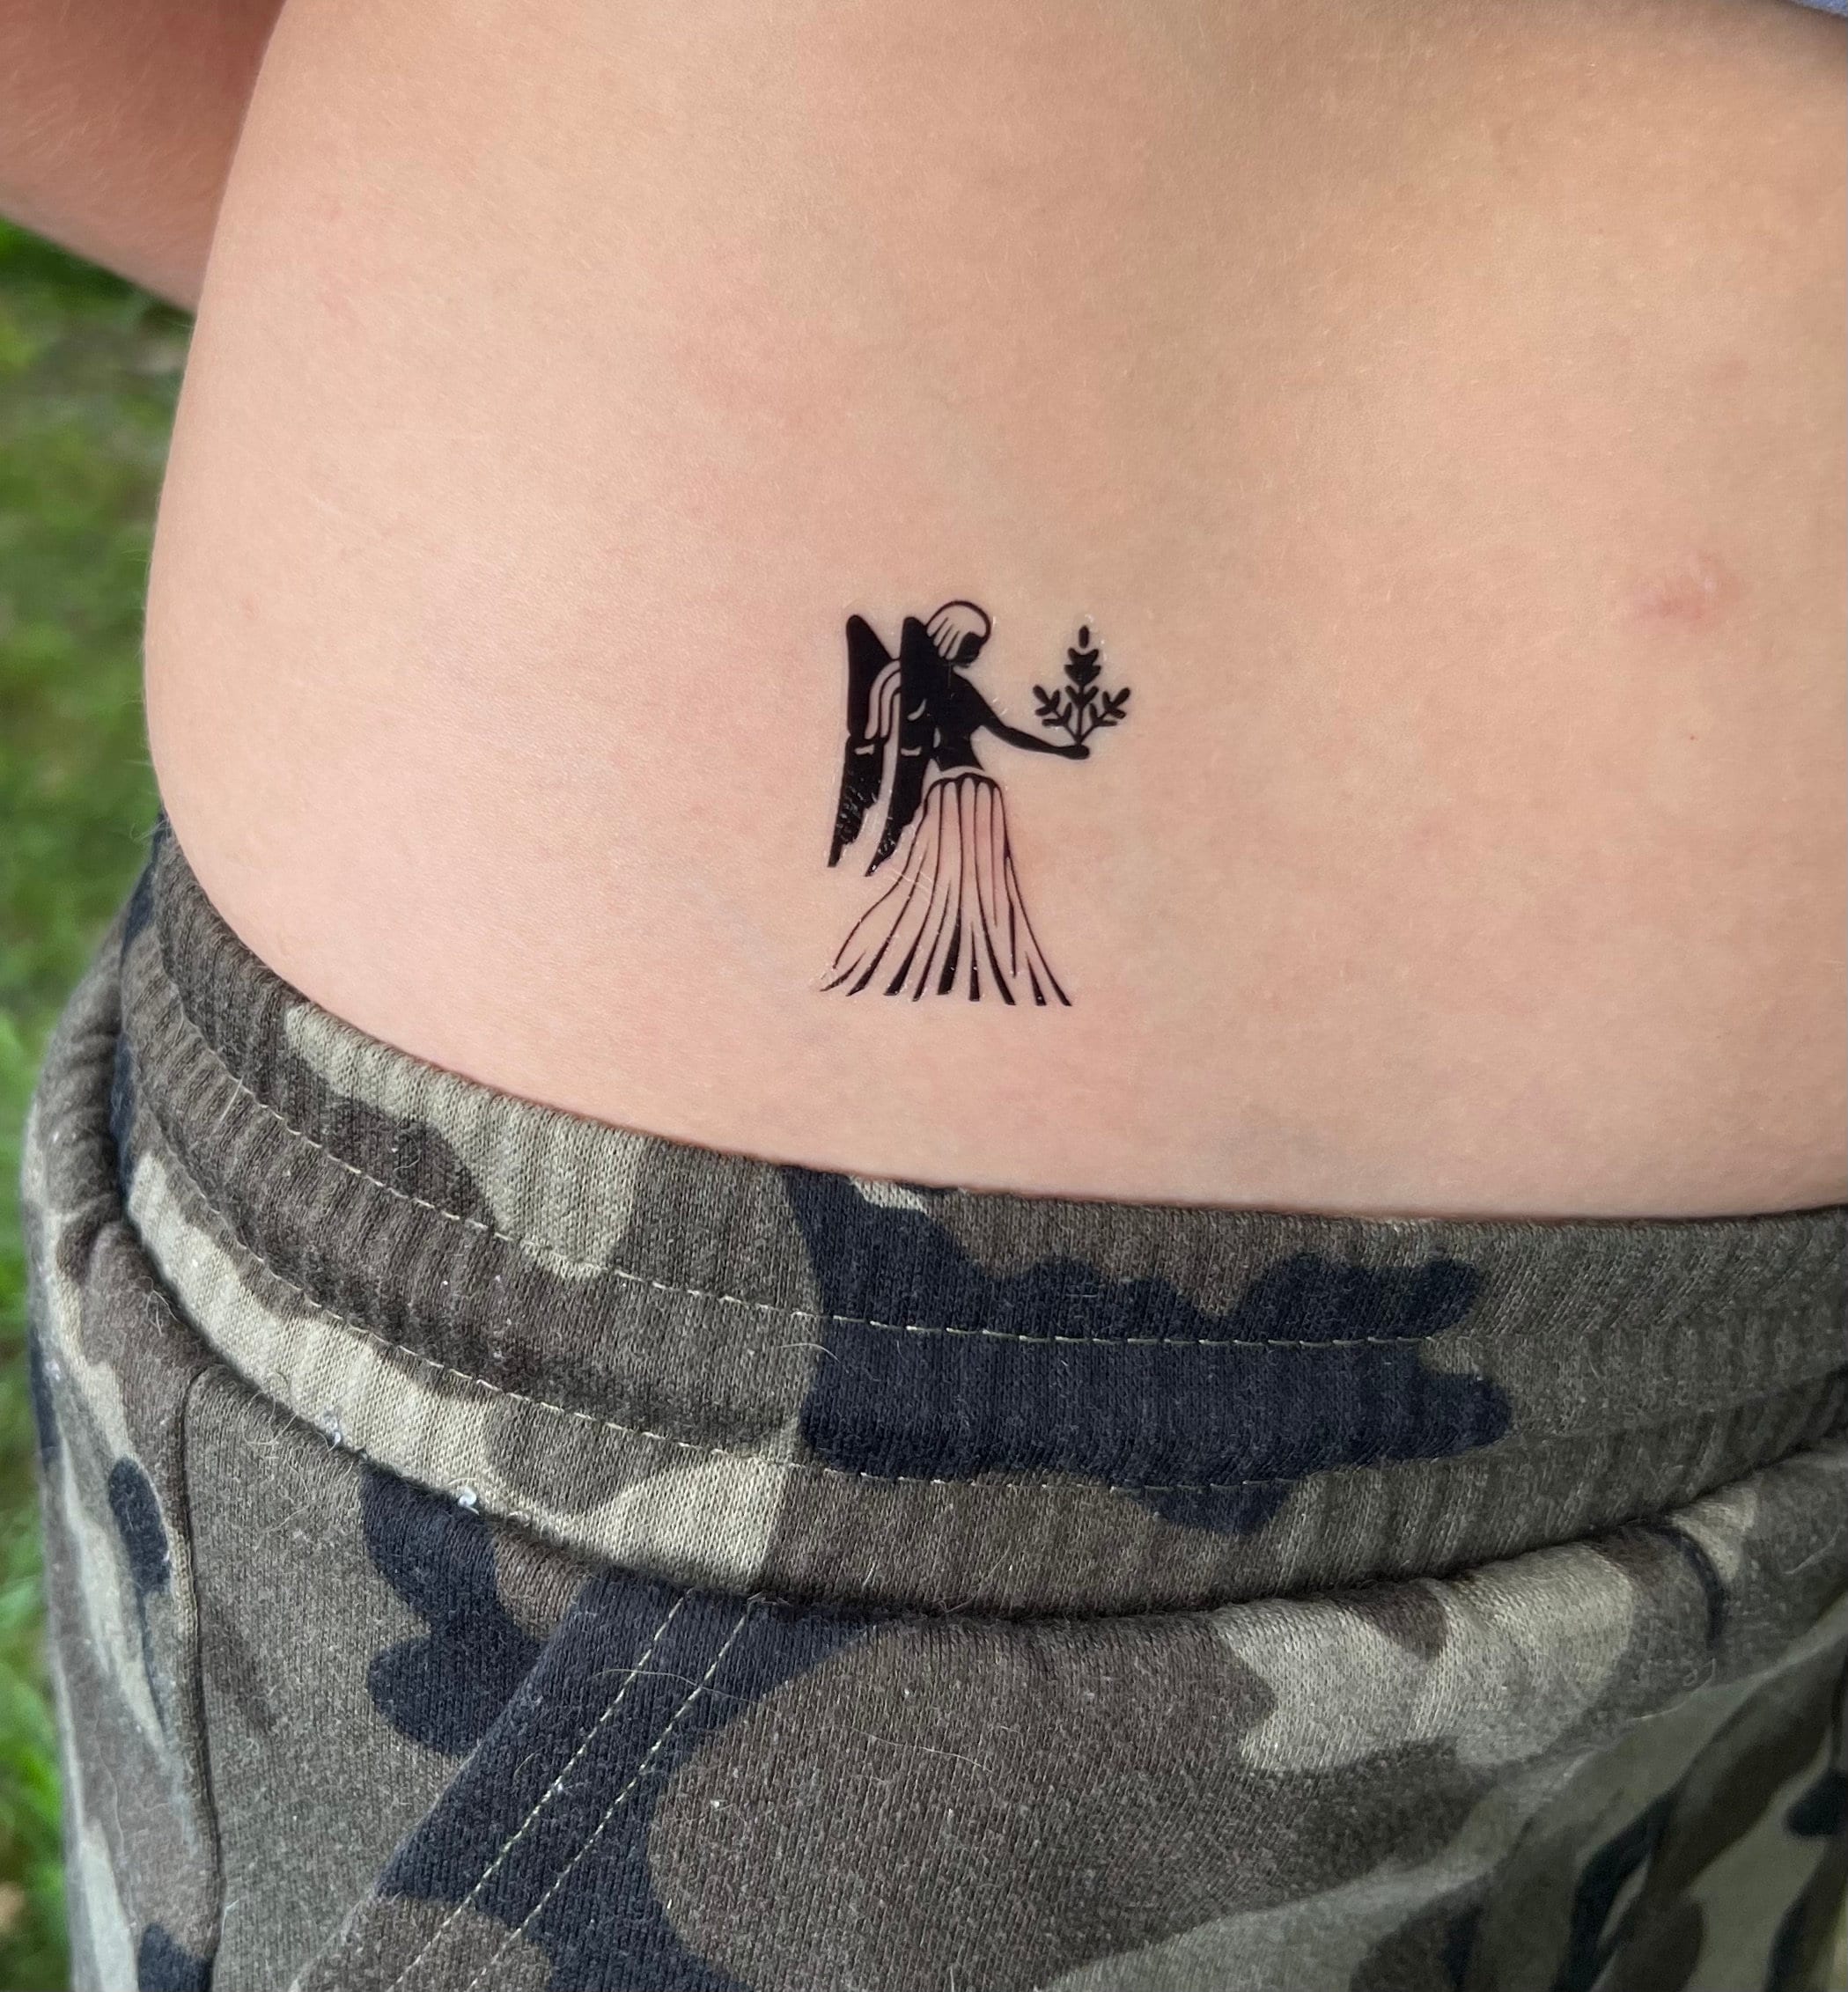 115 Mind-Blowing Virgo Tattoos And Their Meaning - AuthorityTattoo